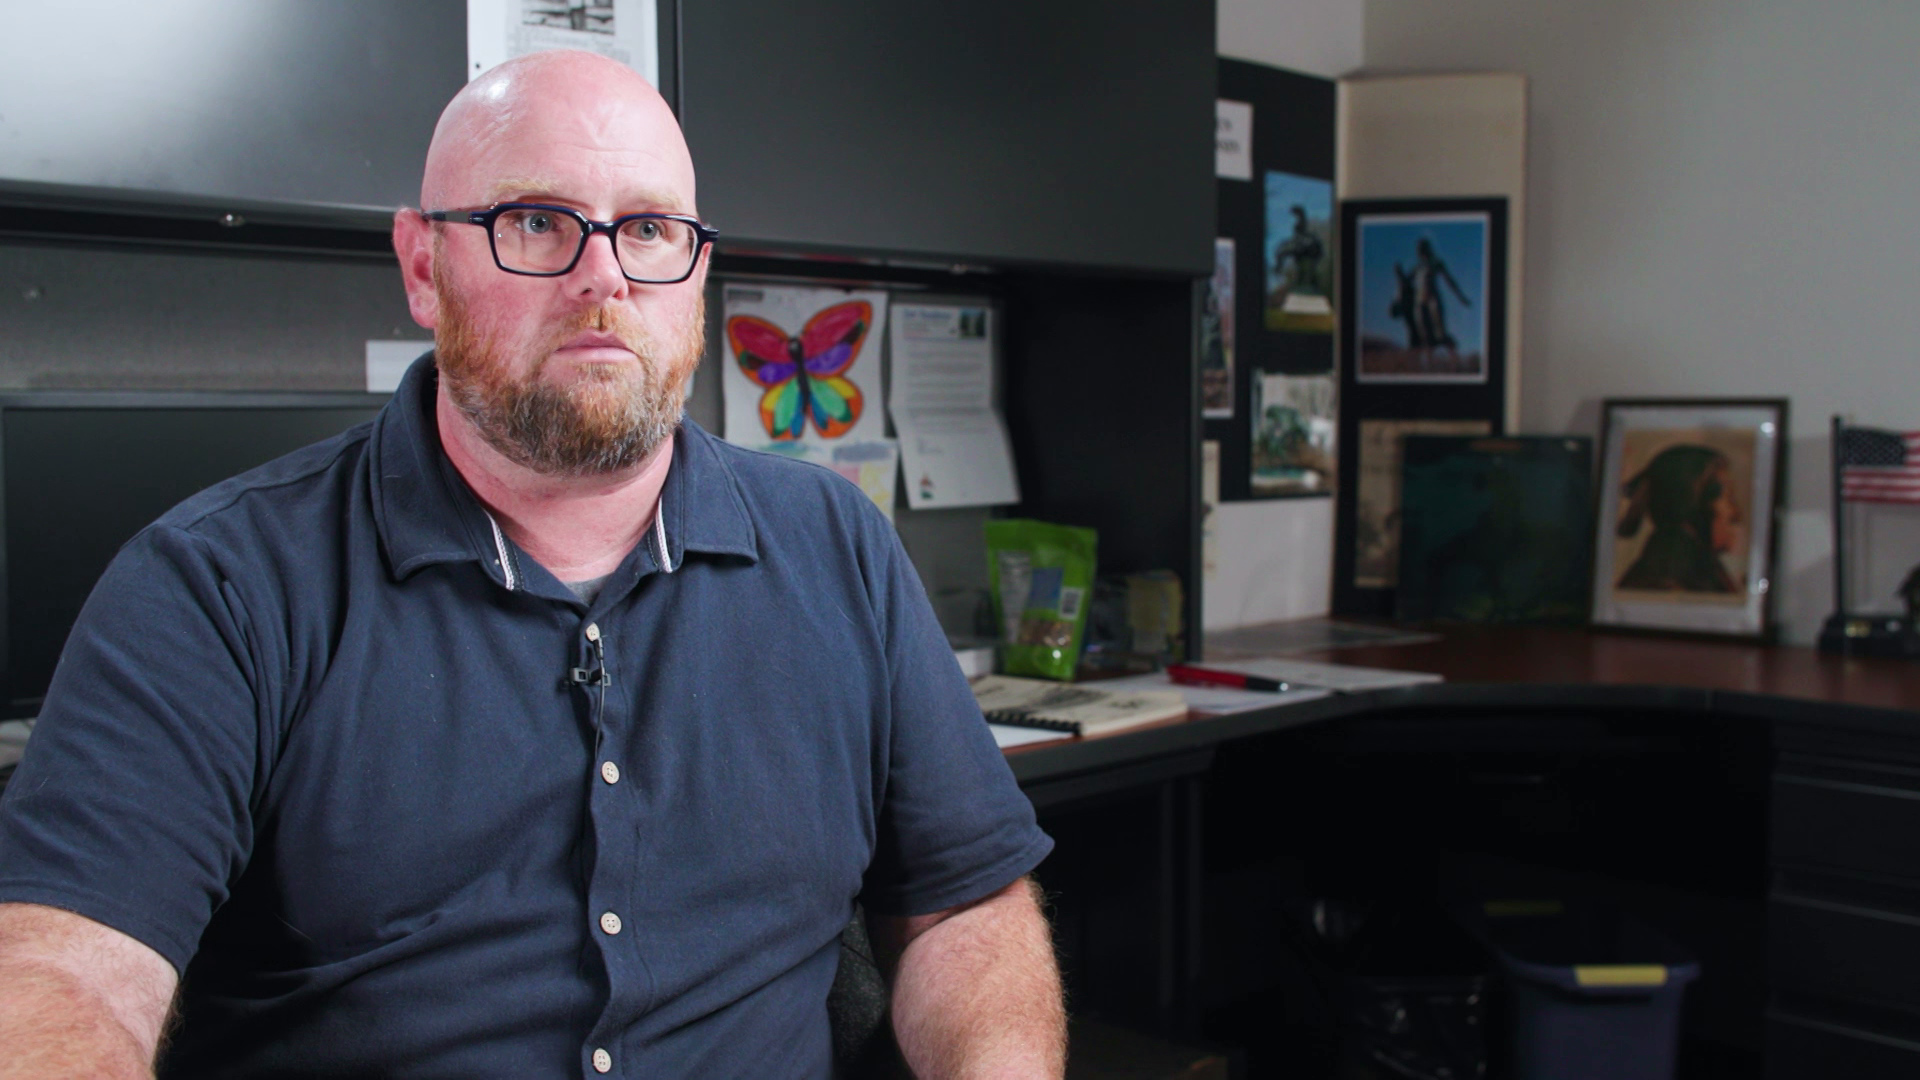 Rohn Bishop sits in an office with a desk and multiple pieces of art in the background.